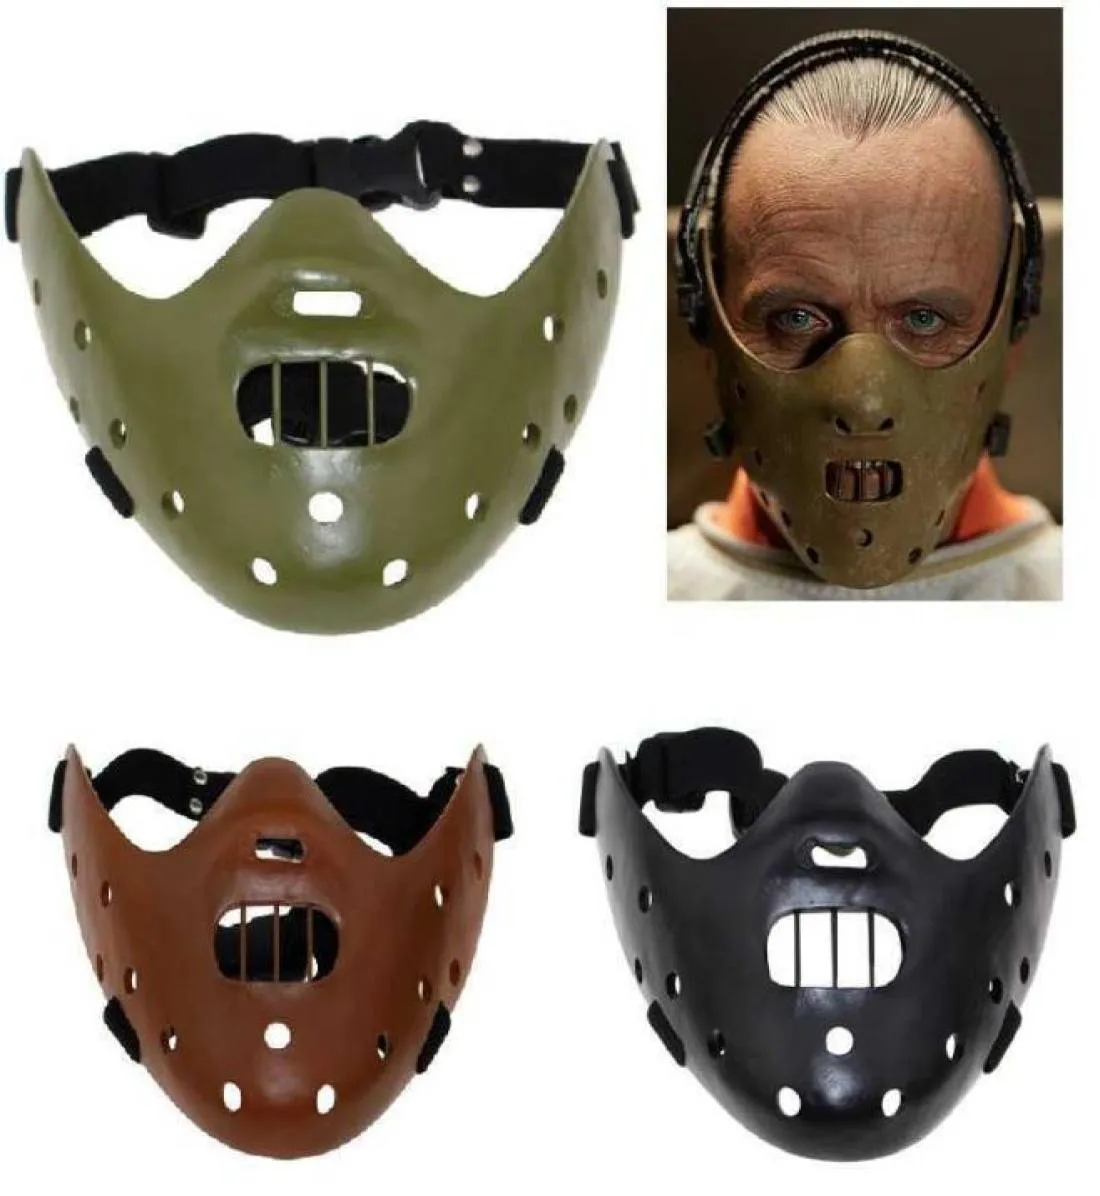 Masches Hannibal Horror Hannibal Resin Scary Lecter Lecter Il silenzio degli agnelli Masquerade Cosplay Party Halloween Mask 3 Colori Q08061678374